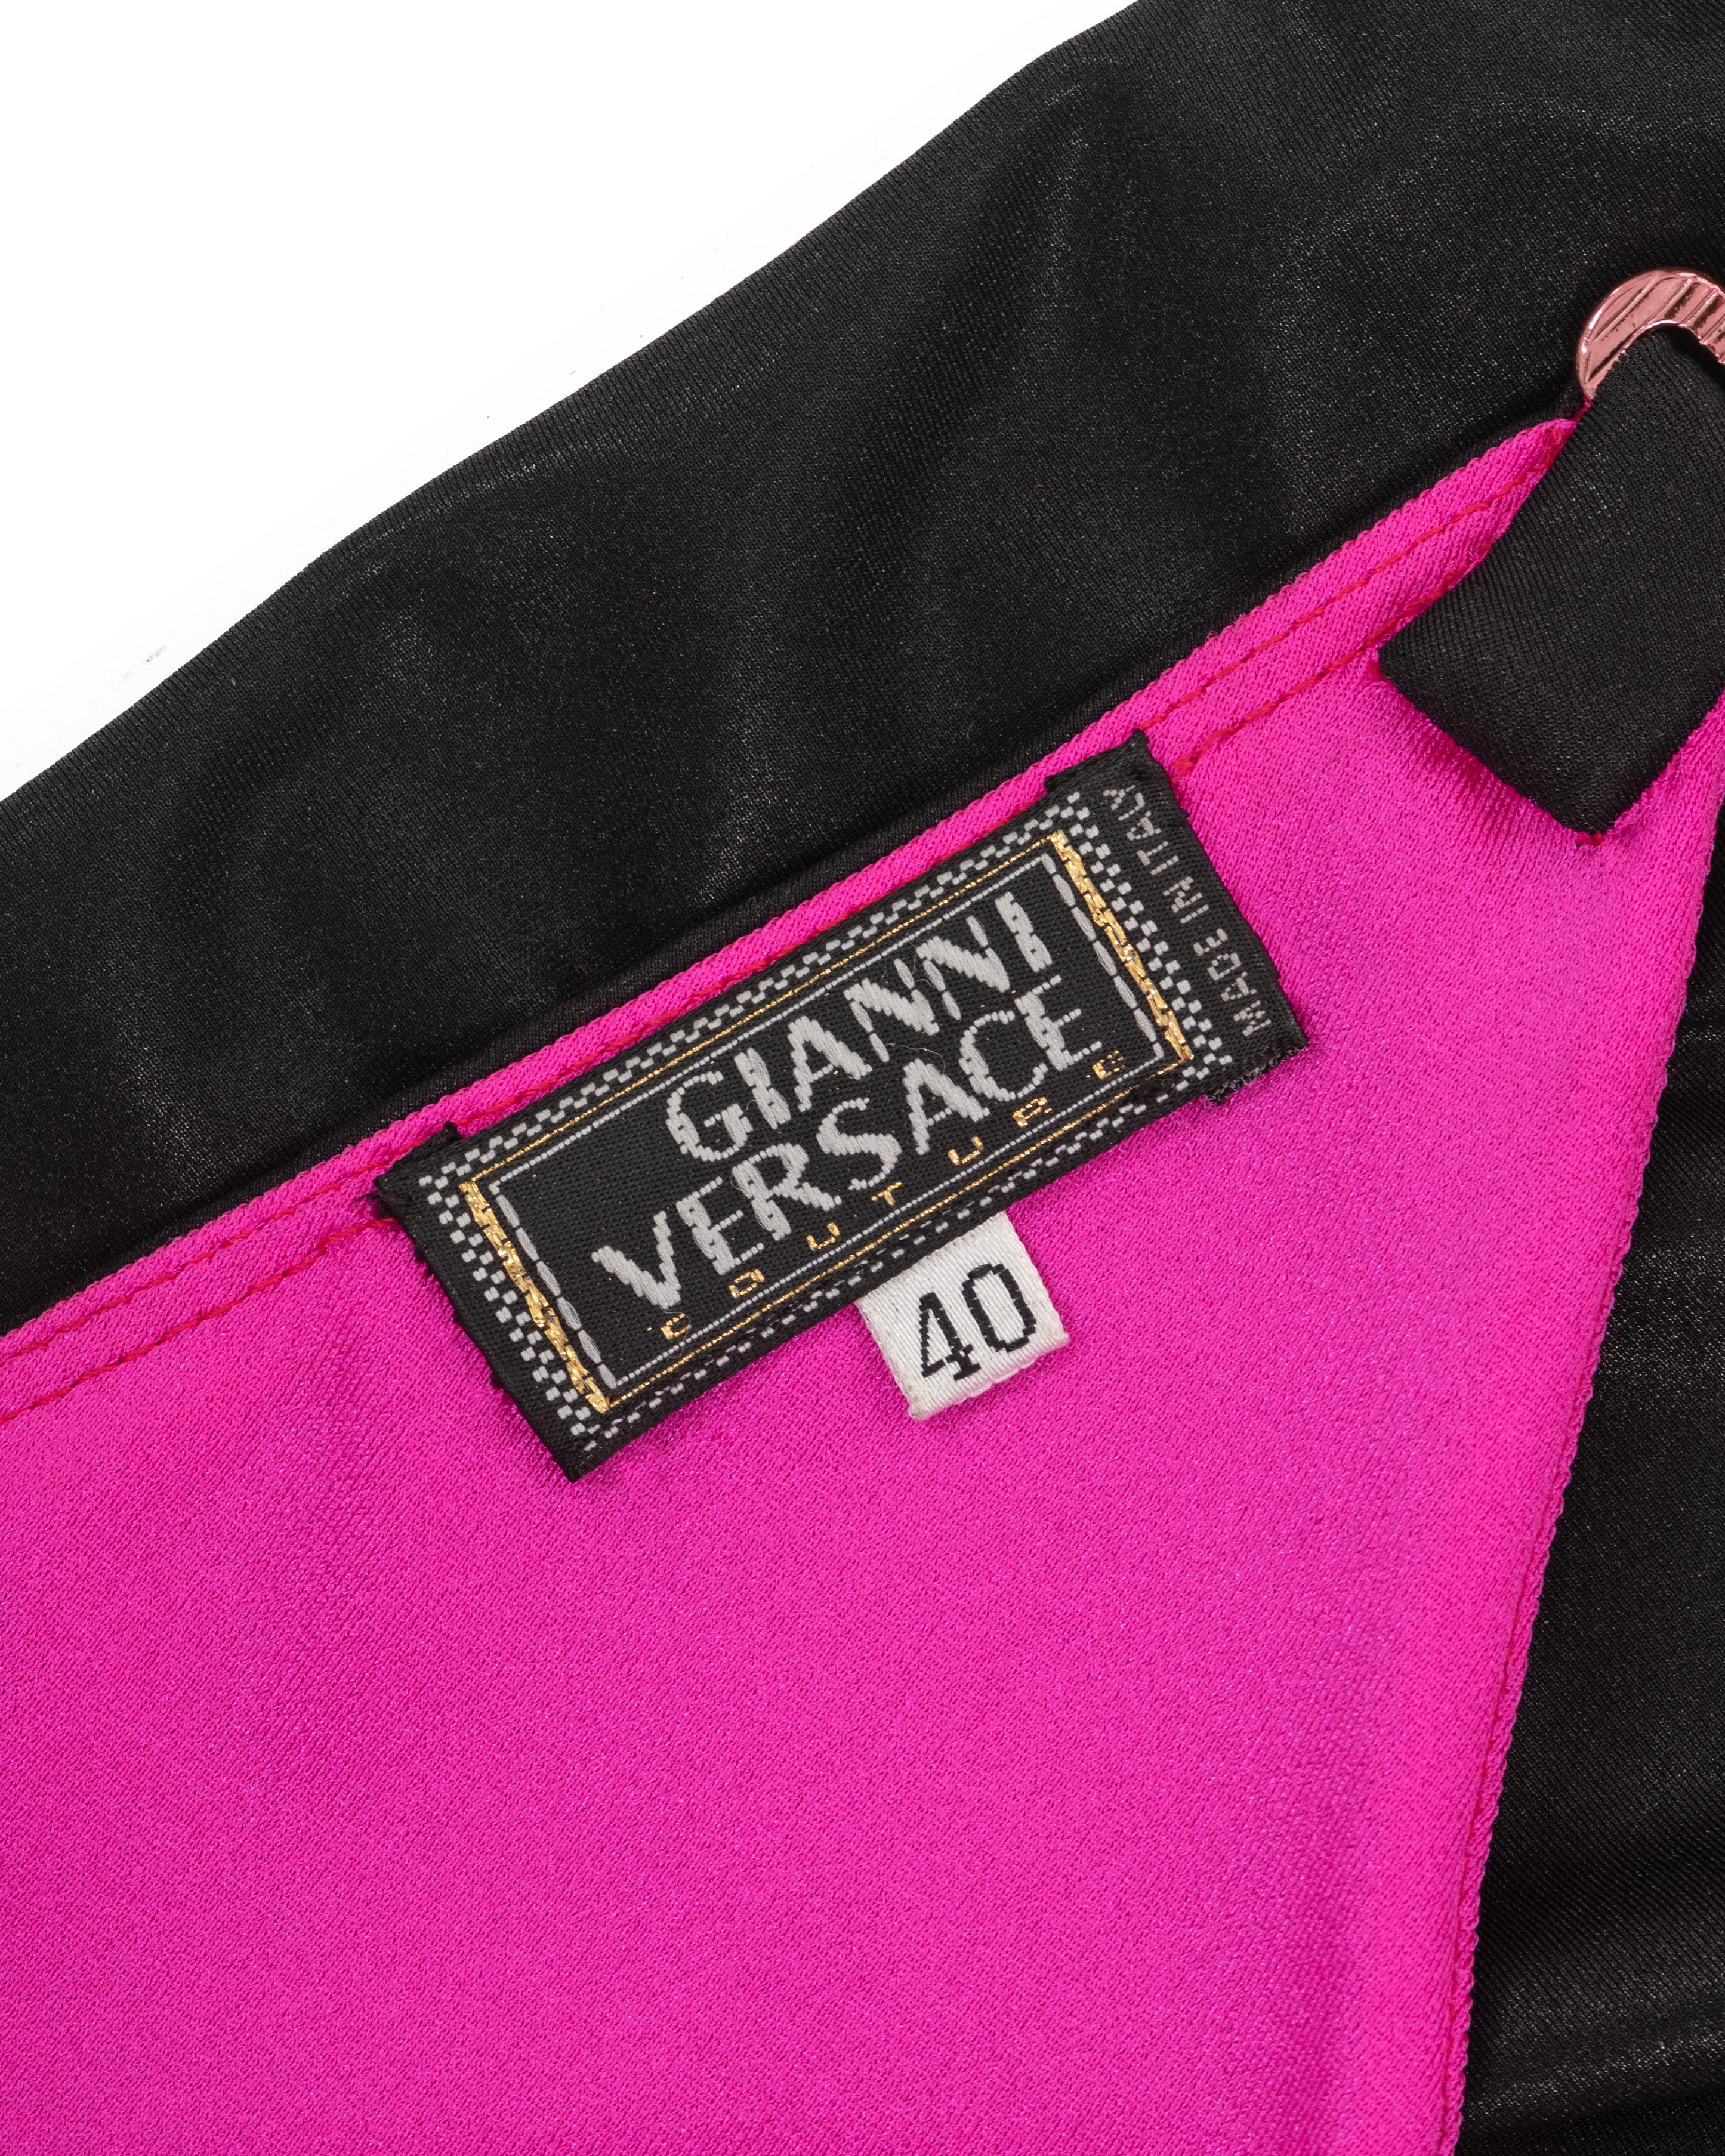 Gianni Versace black wet-look strapless evening dress with cut outs, ss 1998 For Sale 13